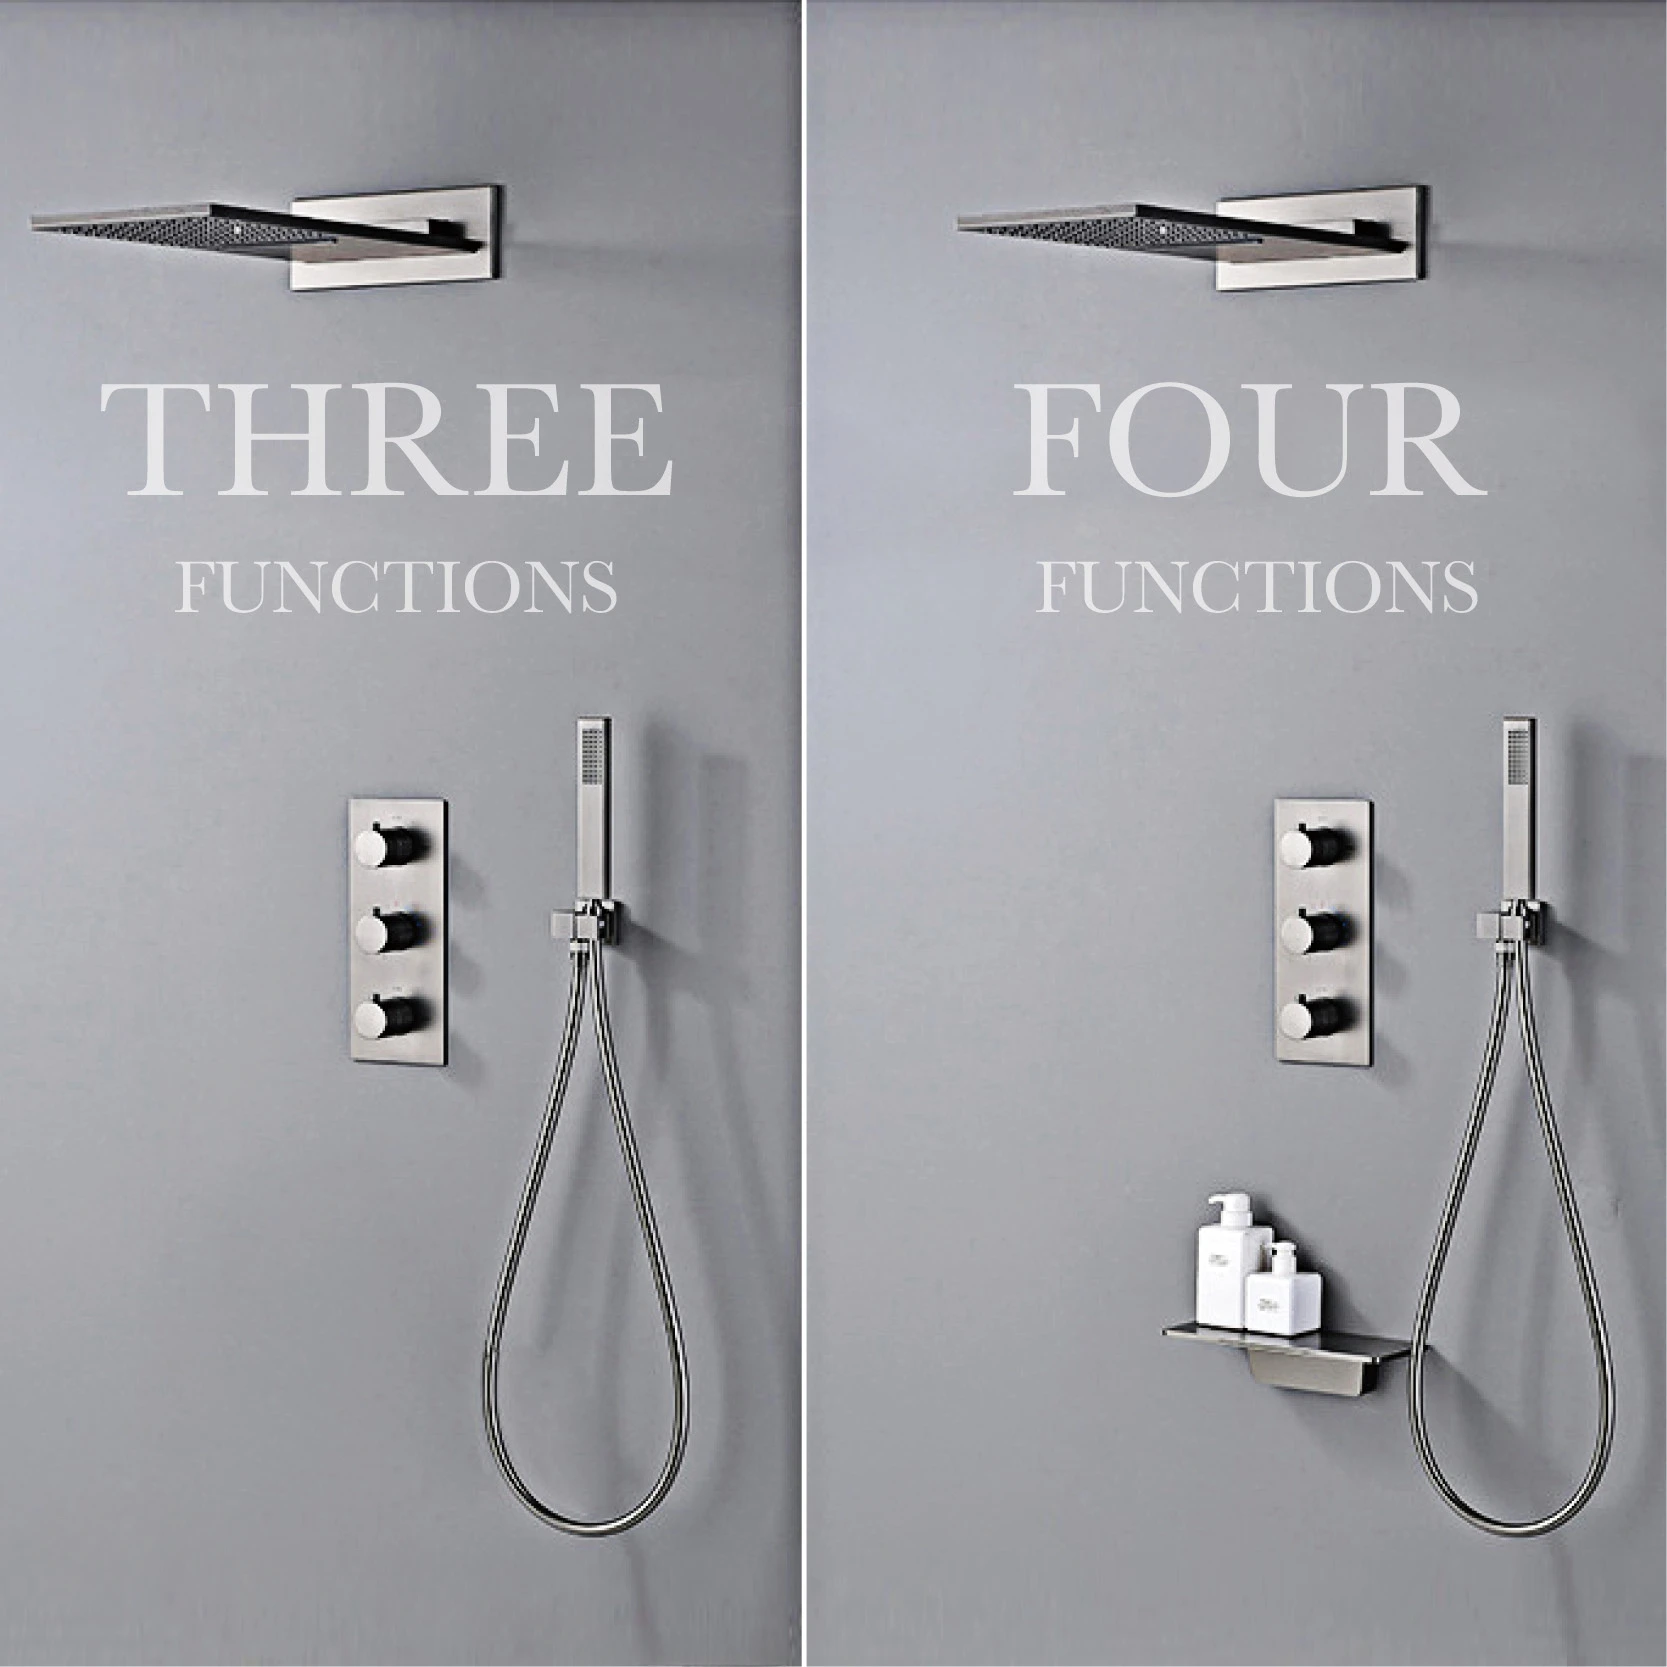 

Luxury gun gray brass shower system with concealed design Three handles Dual control of hot and cold 4-function bathroom faucet